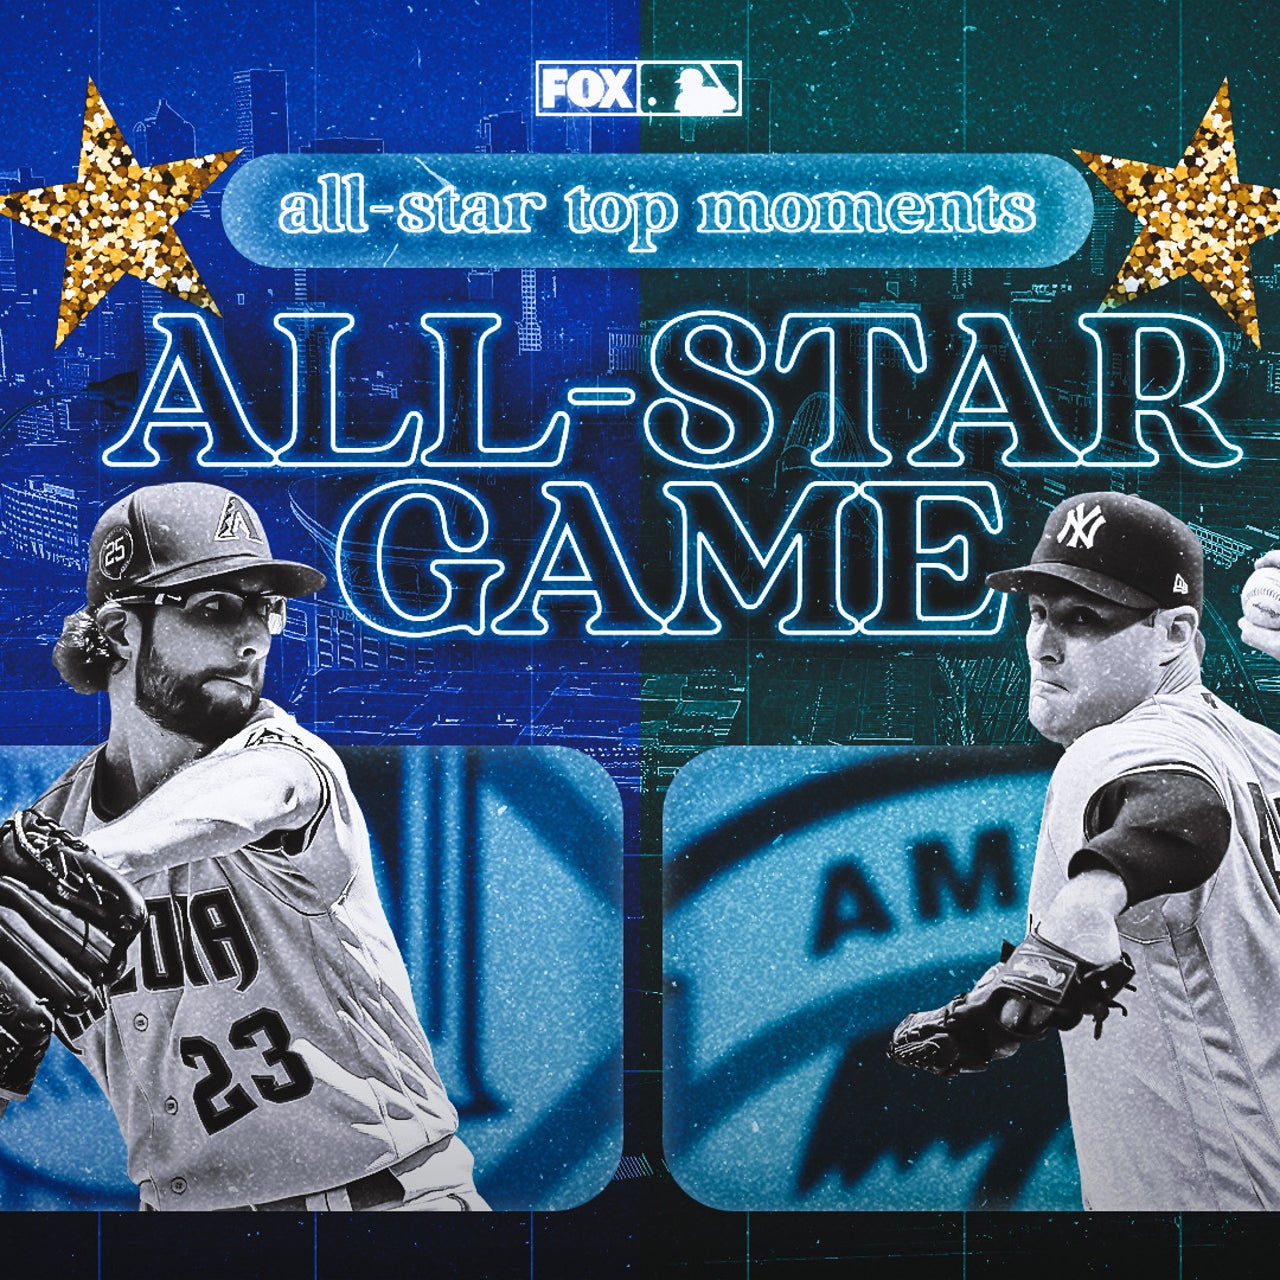 2023 MLB All-Star Game Preview